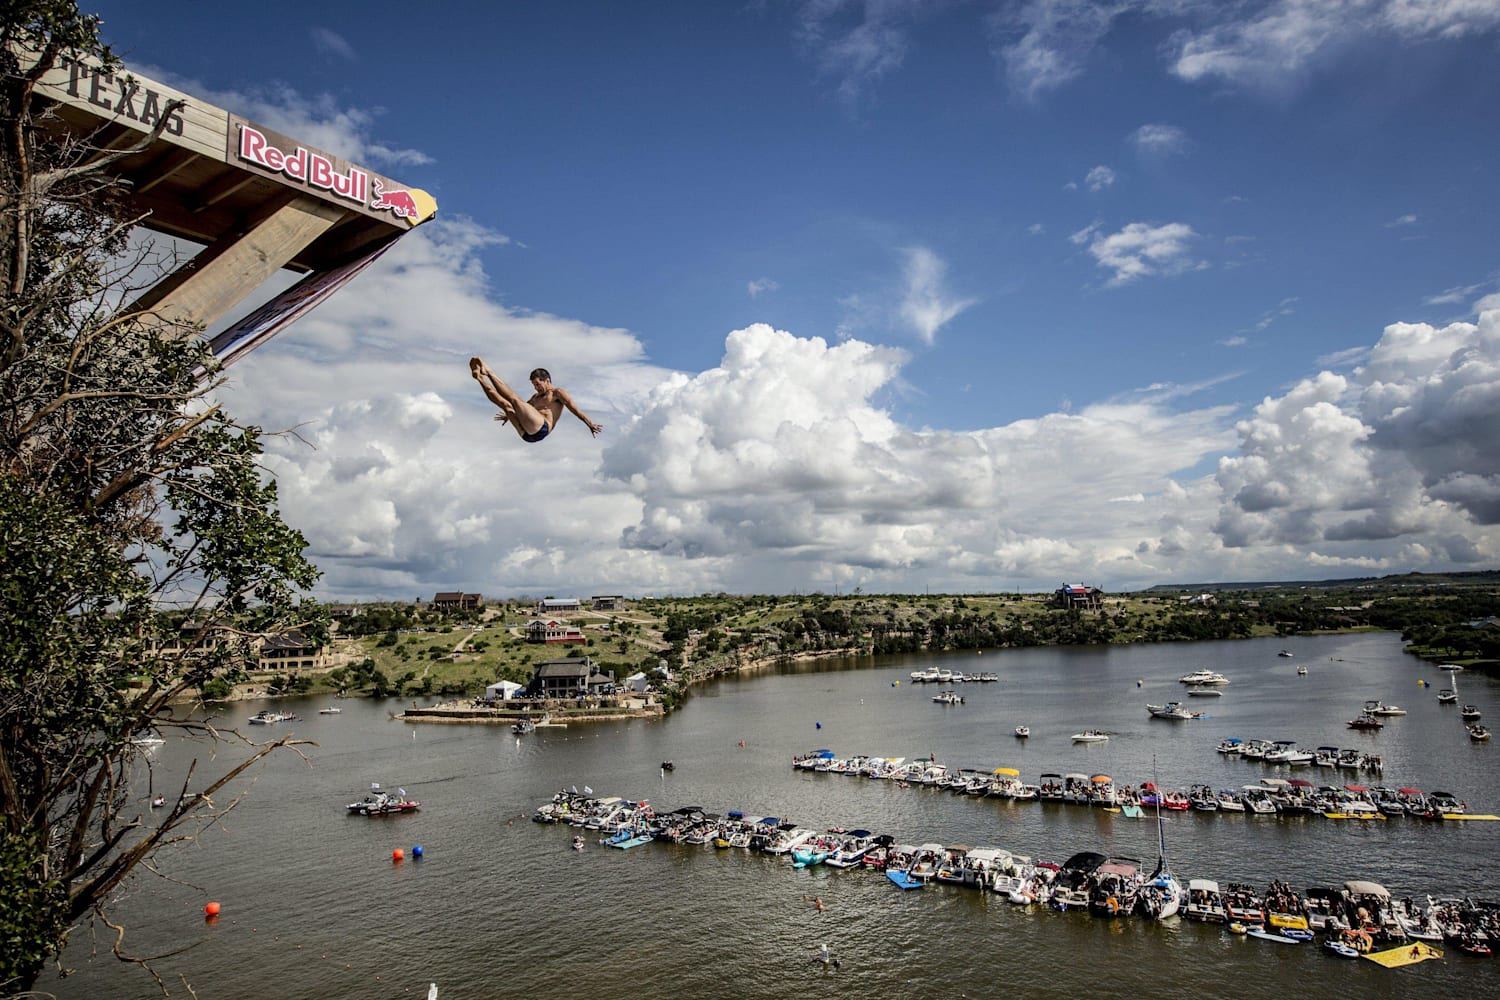 Possum Kingdom Lake Red Bull - David Colturi, from Los Angeles, twists his body after ... - Possum kingdom lake is a 20,000 acre reservoir known for its clear blue waters.